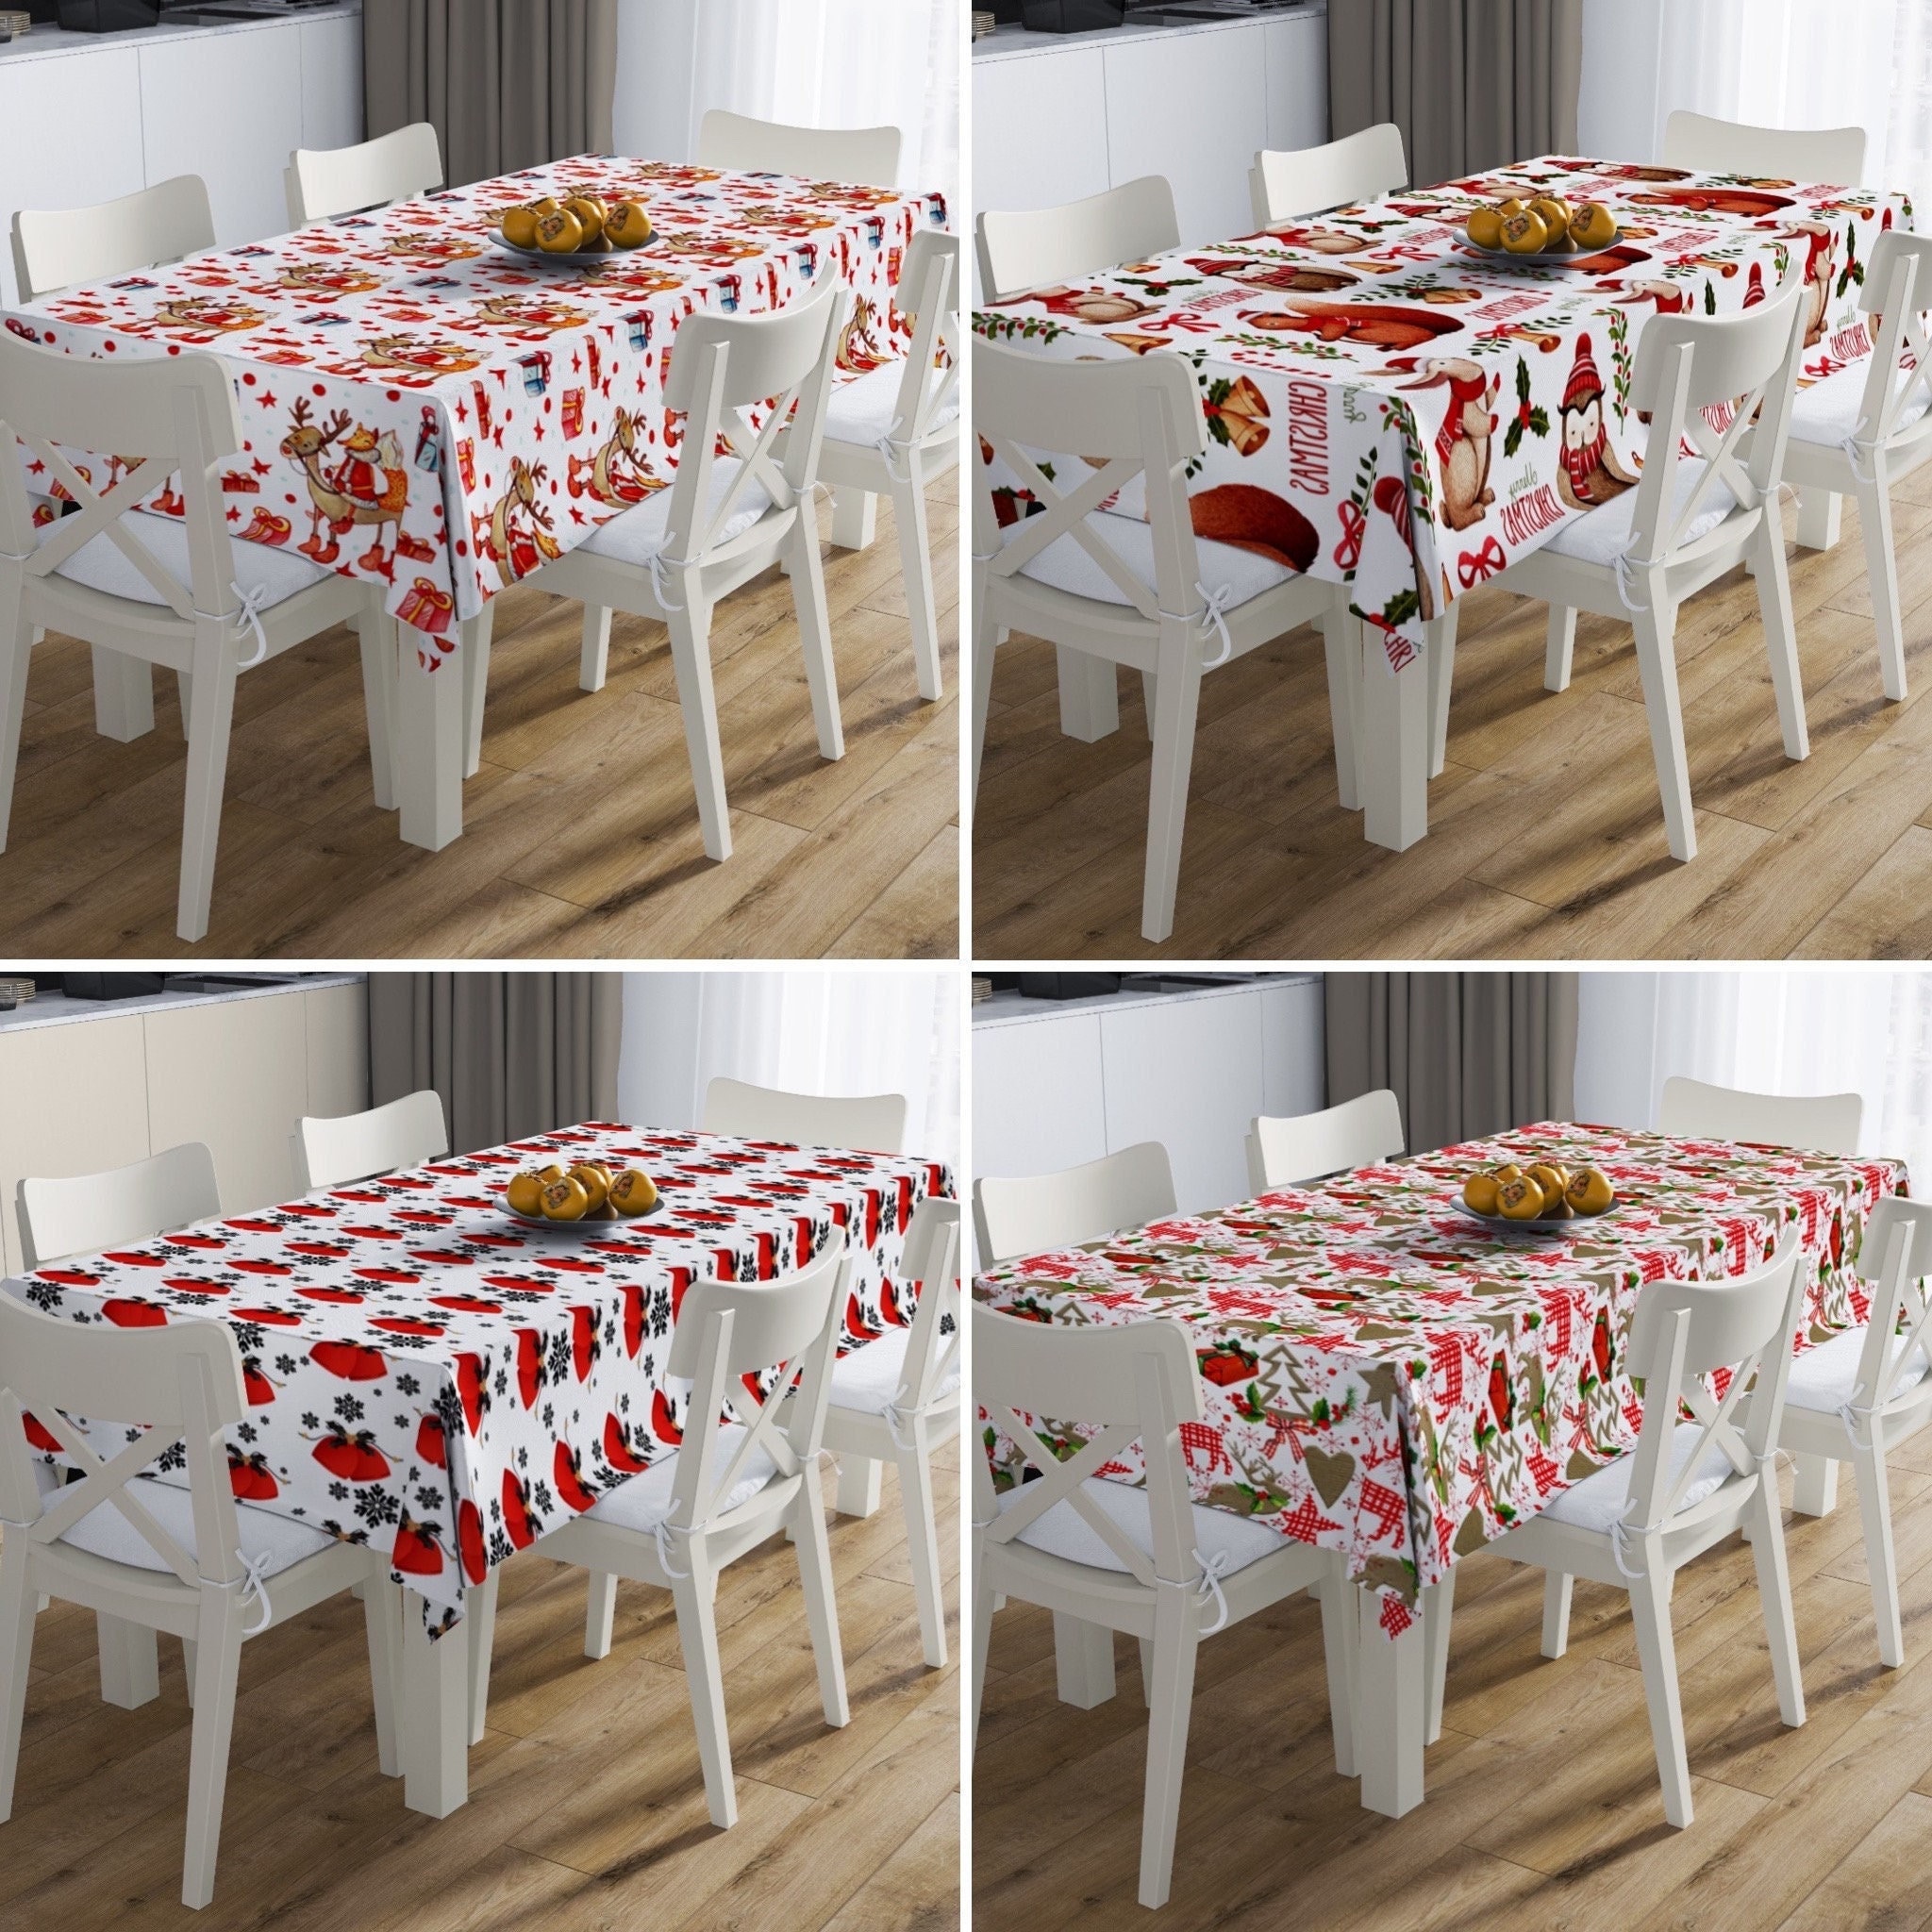 European table sheet wedding restaurant party banquet decoration cloth  Cover tablecloth dining room restaurant table runner-A 55x55inch(140x140cm)